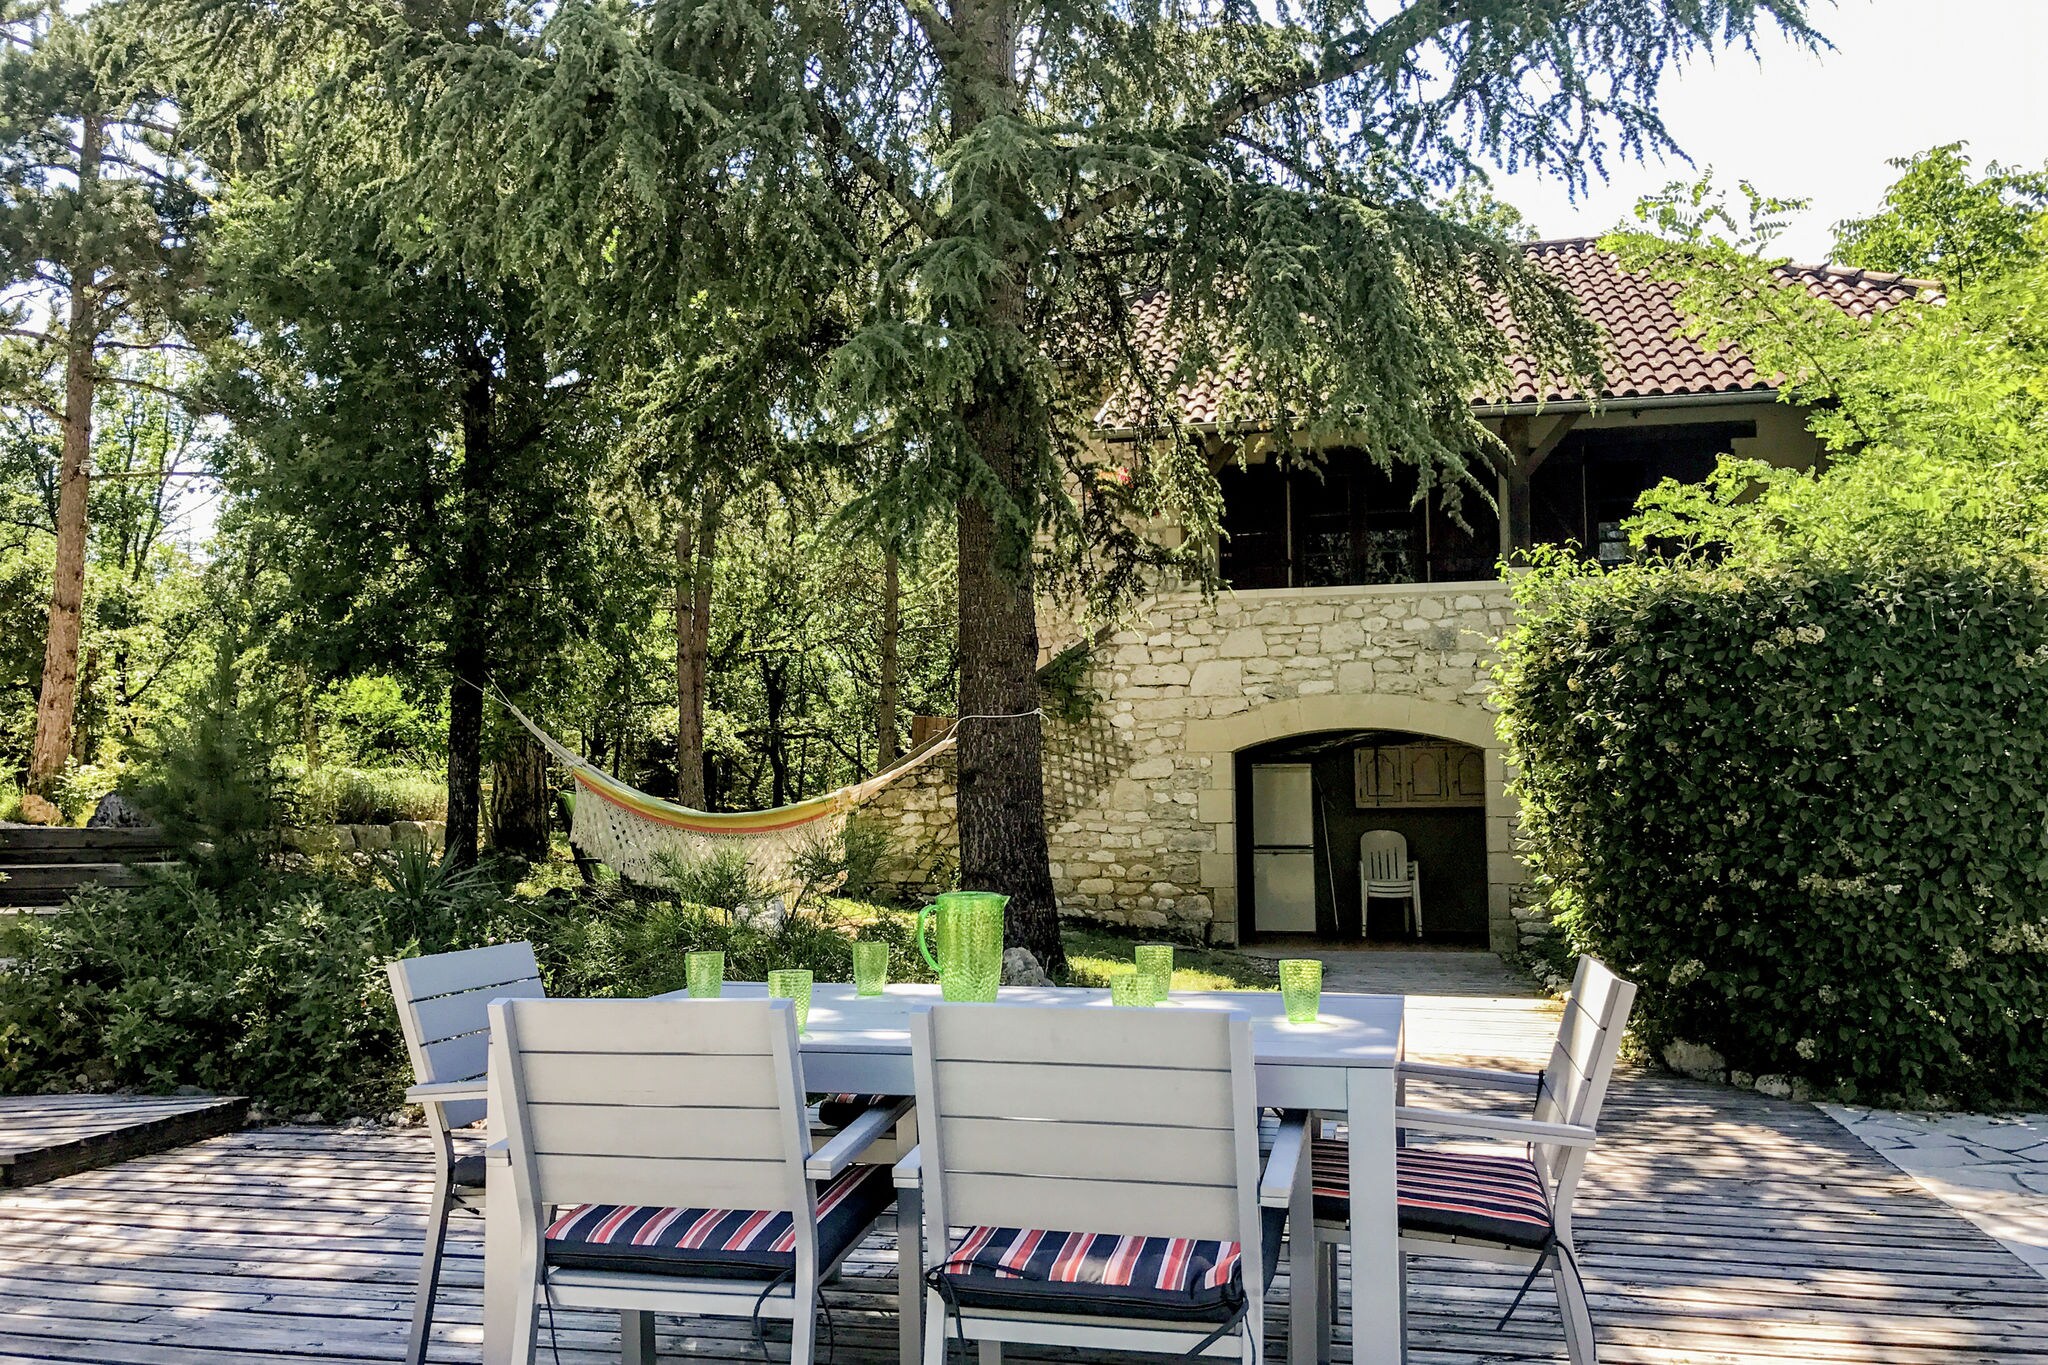 Gite with private swimming pool in wonderful, peaceful setting